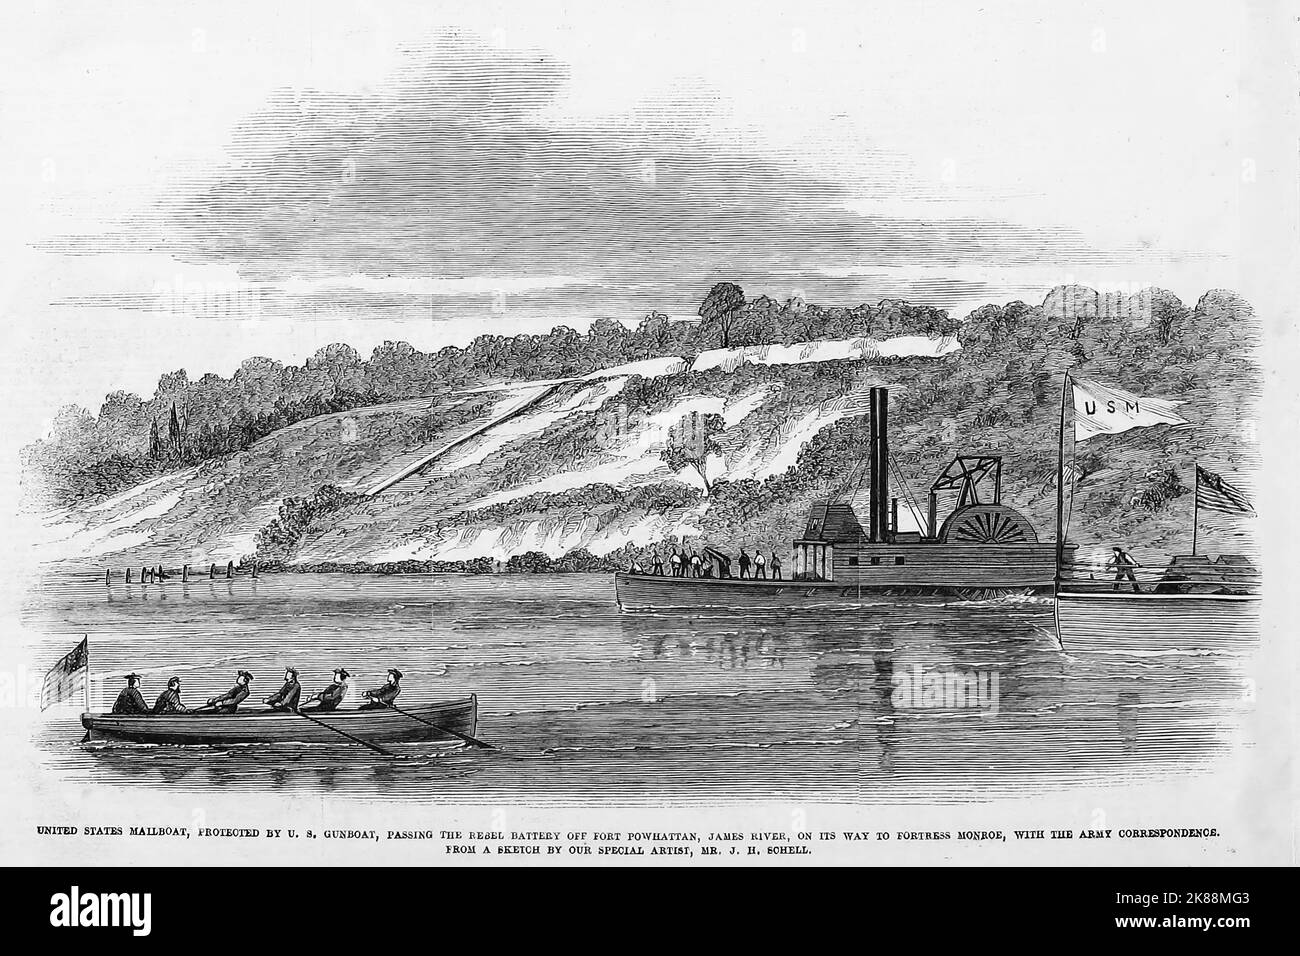 United States Mailboat, protected by the U. S. gunboat, passing the Rebel battery off Fort Powhatan, James River, Virginia, on its way to Fort Monroe, with the Army correspondence. August 1862. 19th century American Civil War illustration from Frank Leslie's Illustrated Newspaper Stock Photo